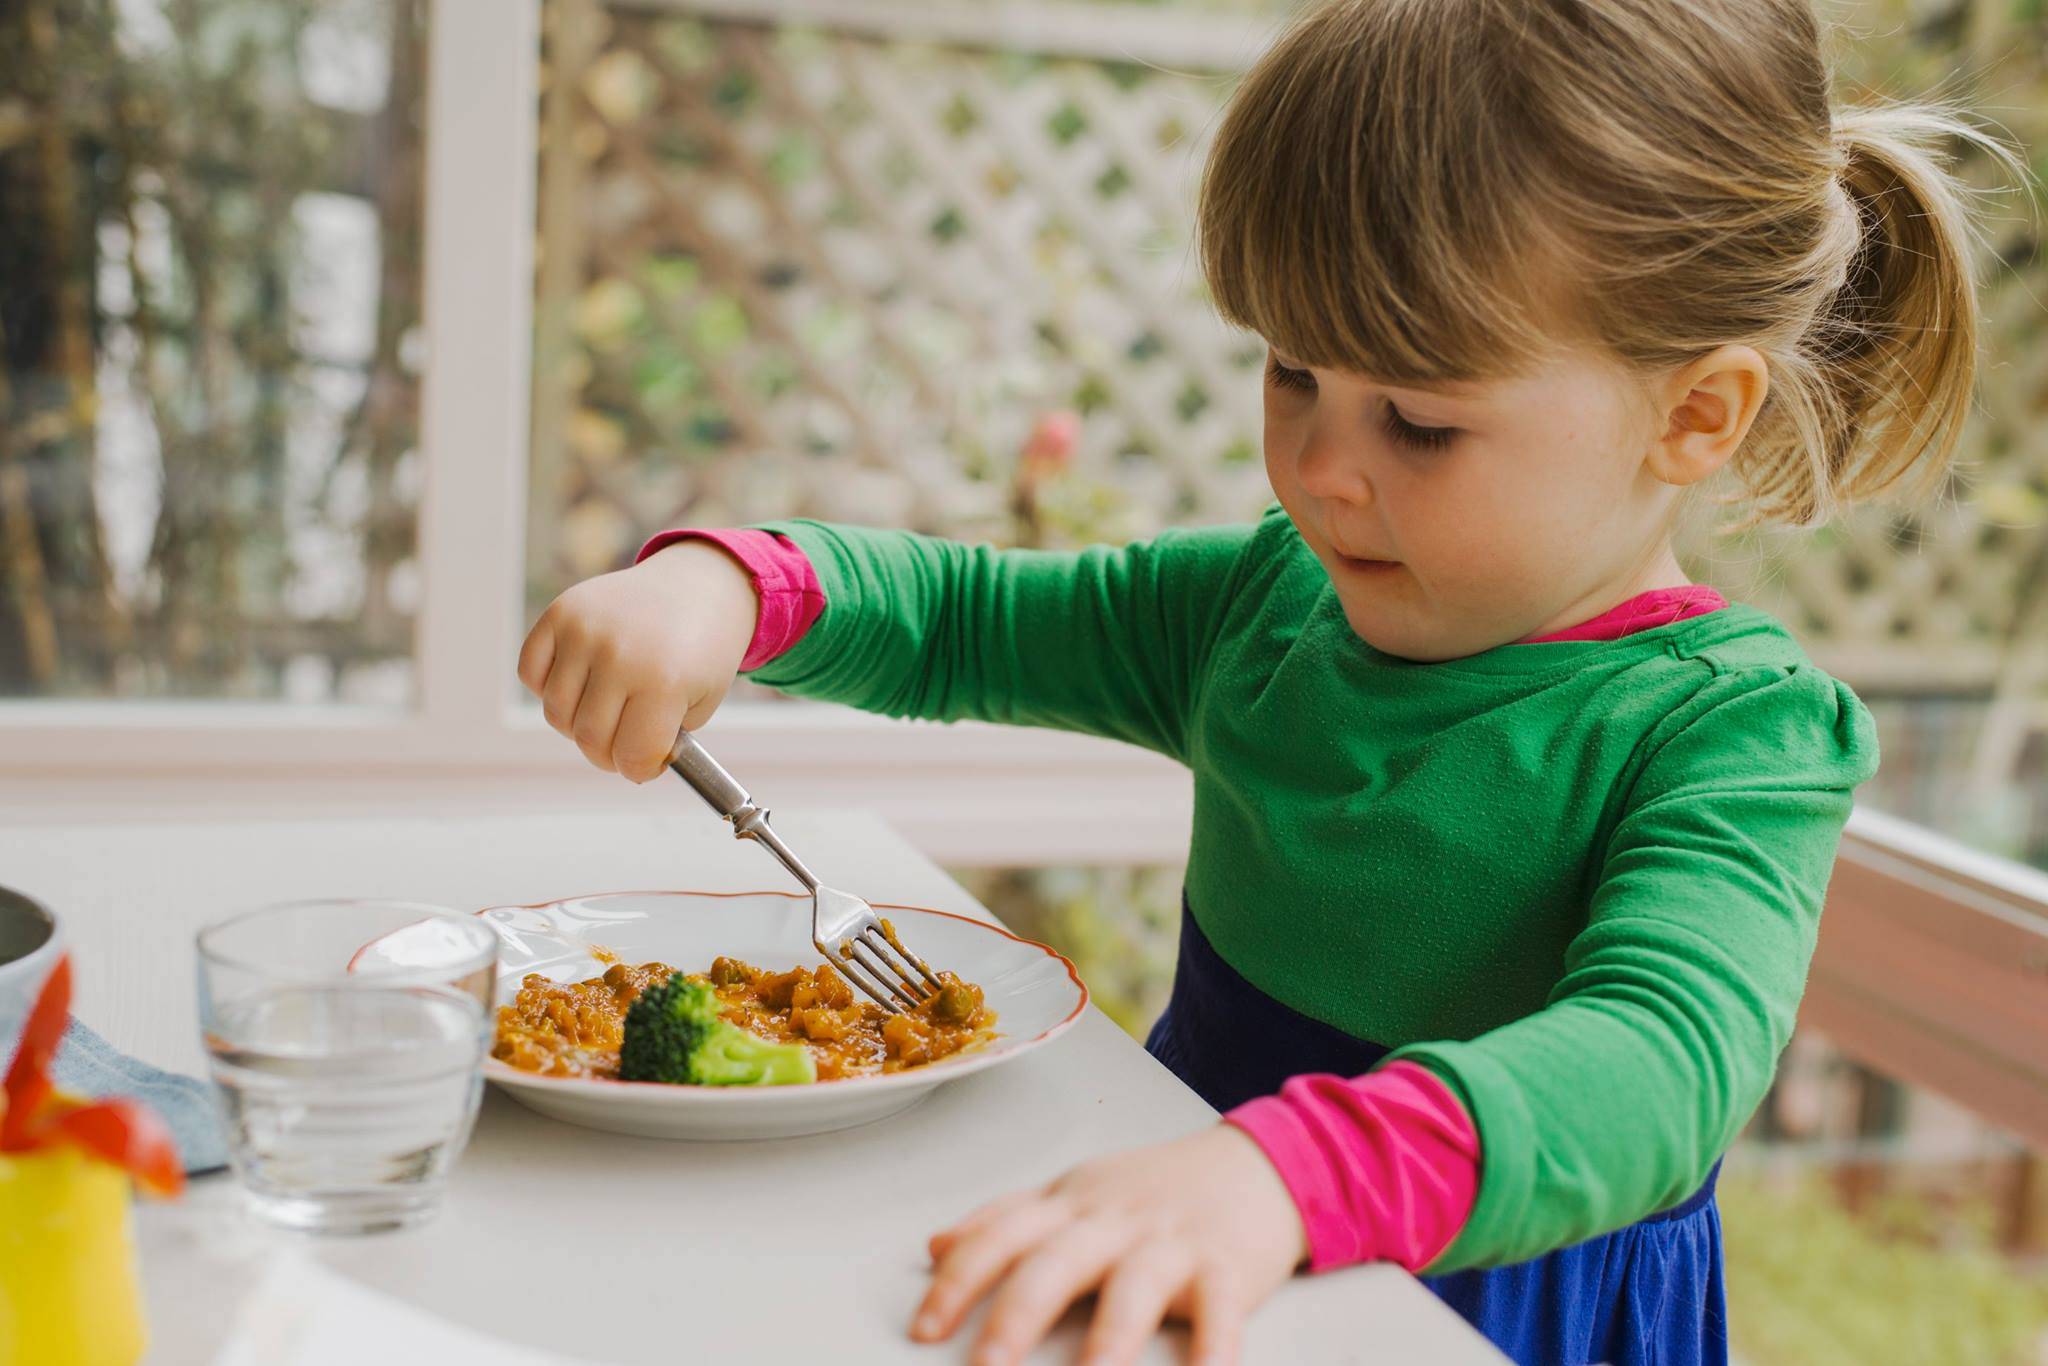 Little Dish makes healthy microwave meals for kids